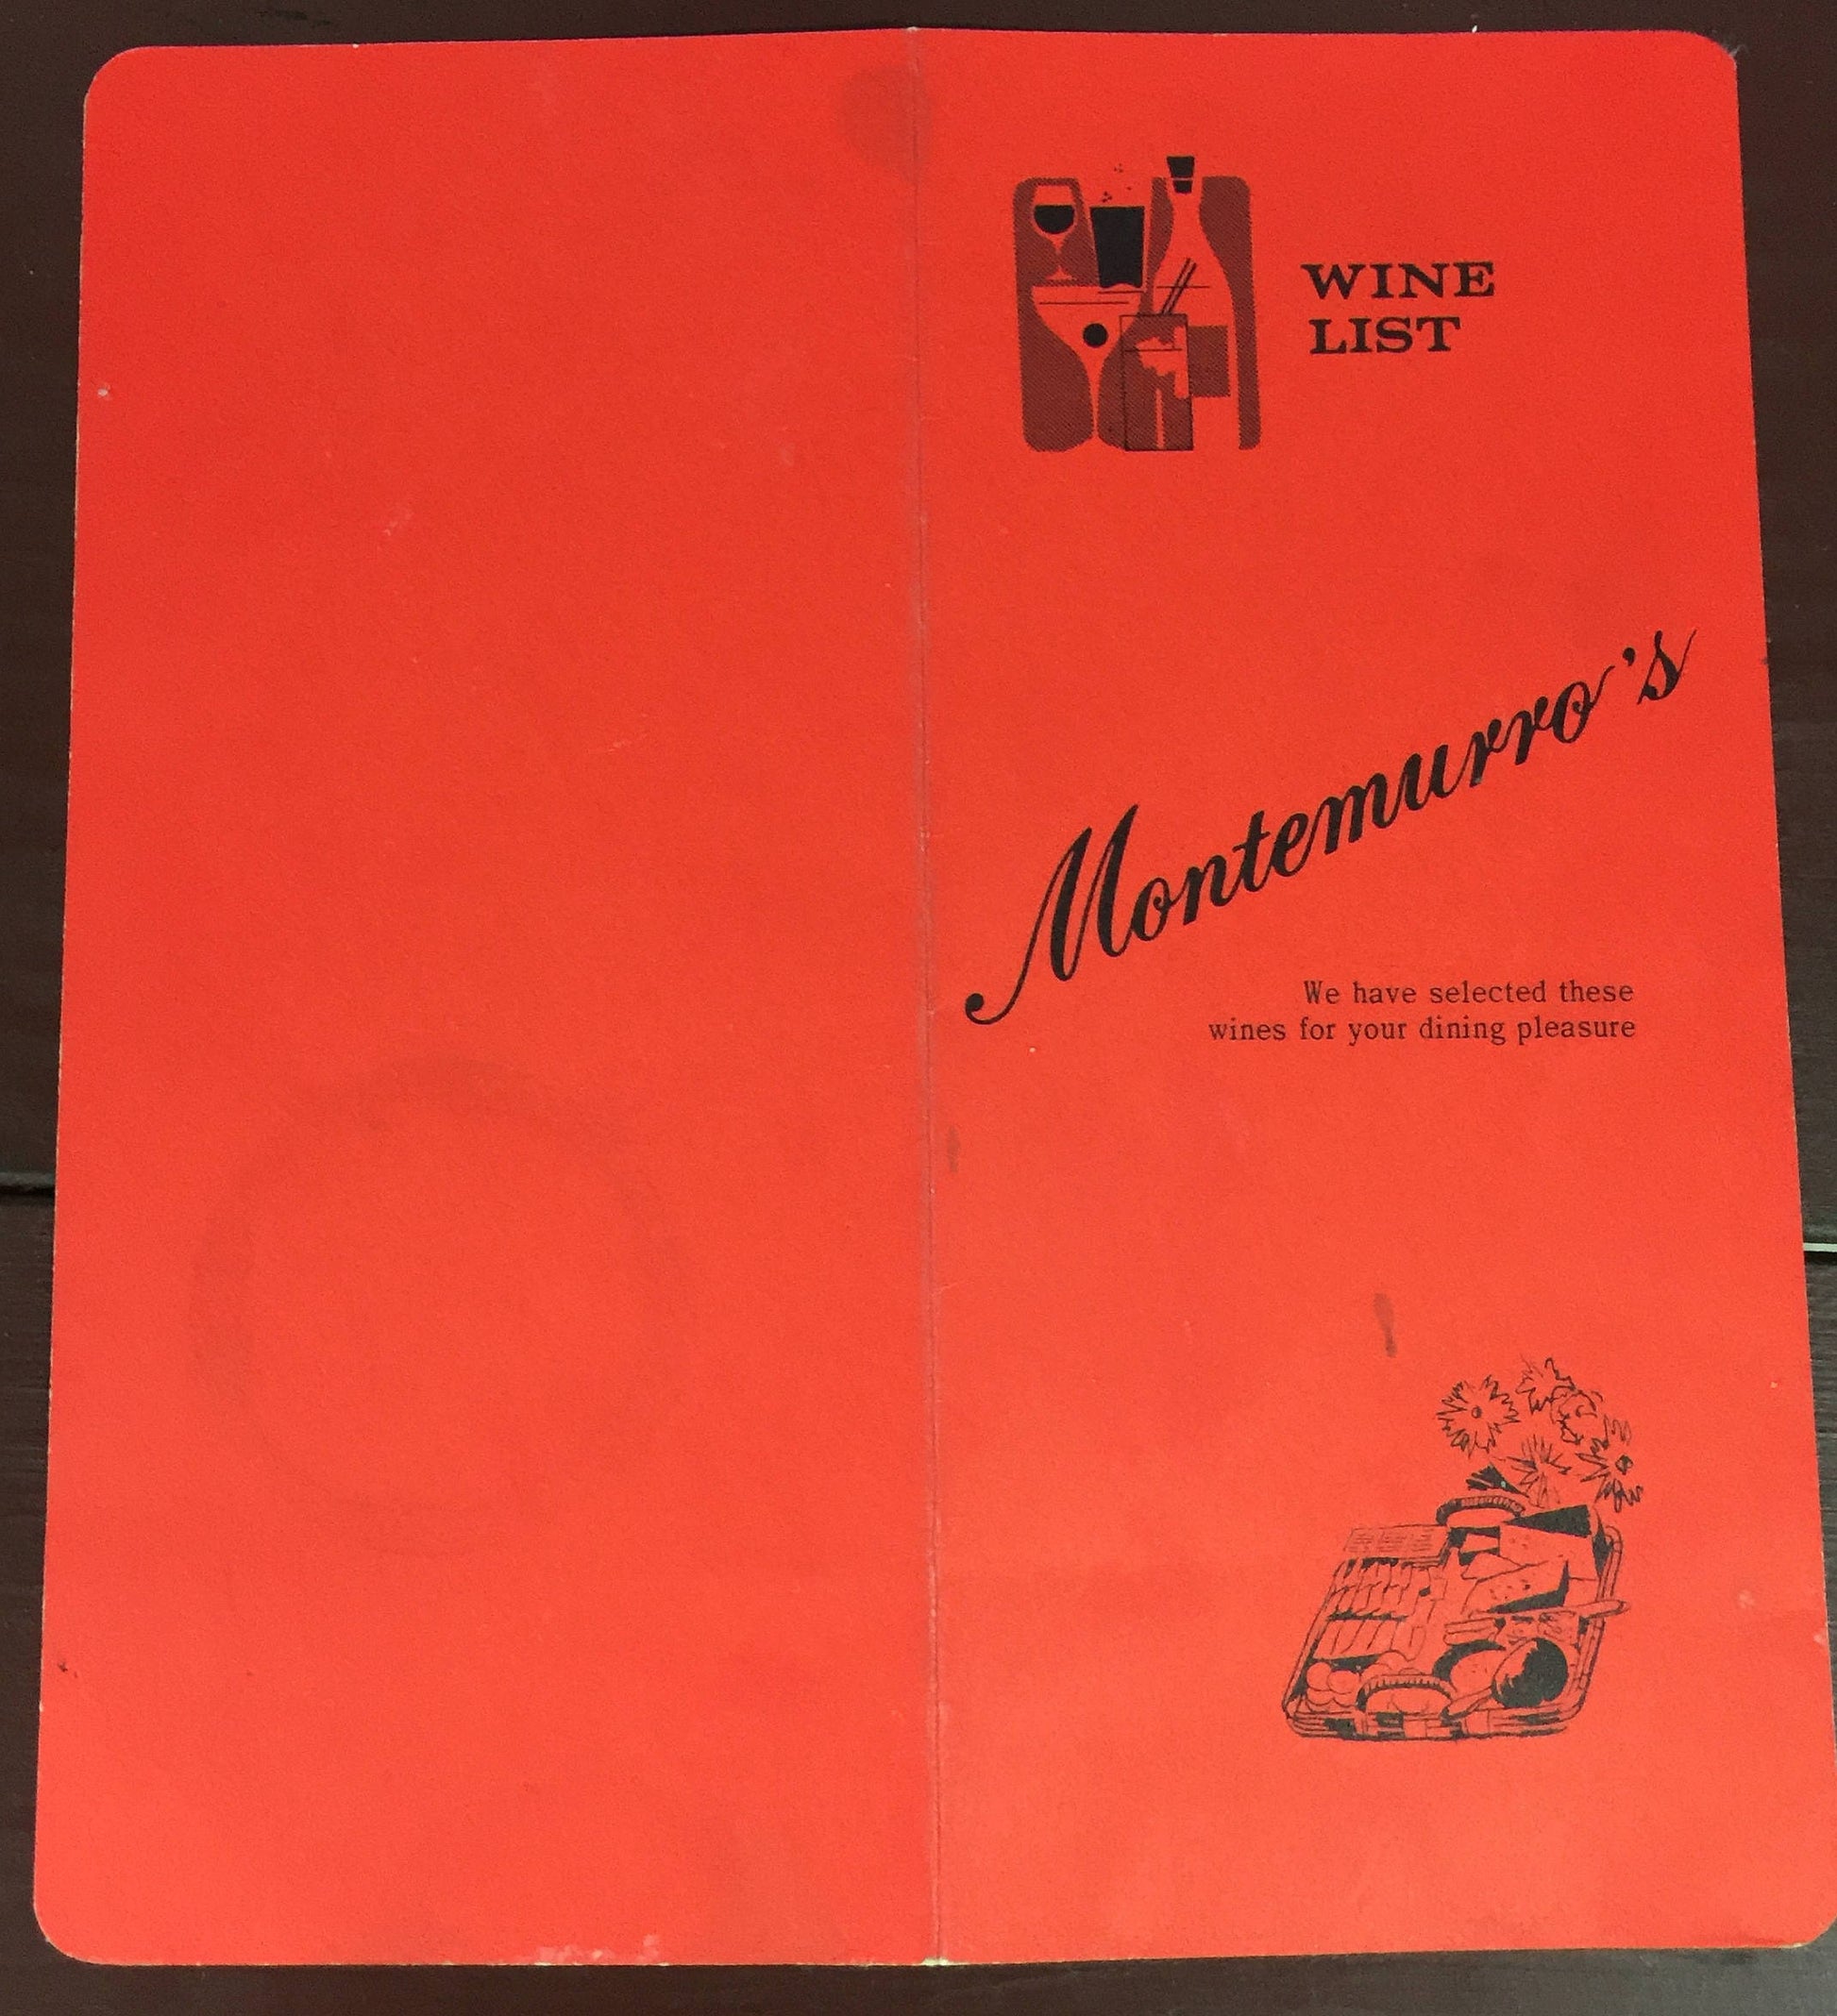 Vintage Collectible wine list from Montemurro's Sharpsburg, PA